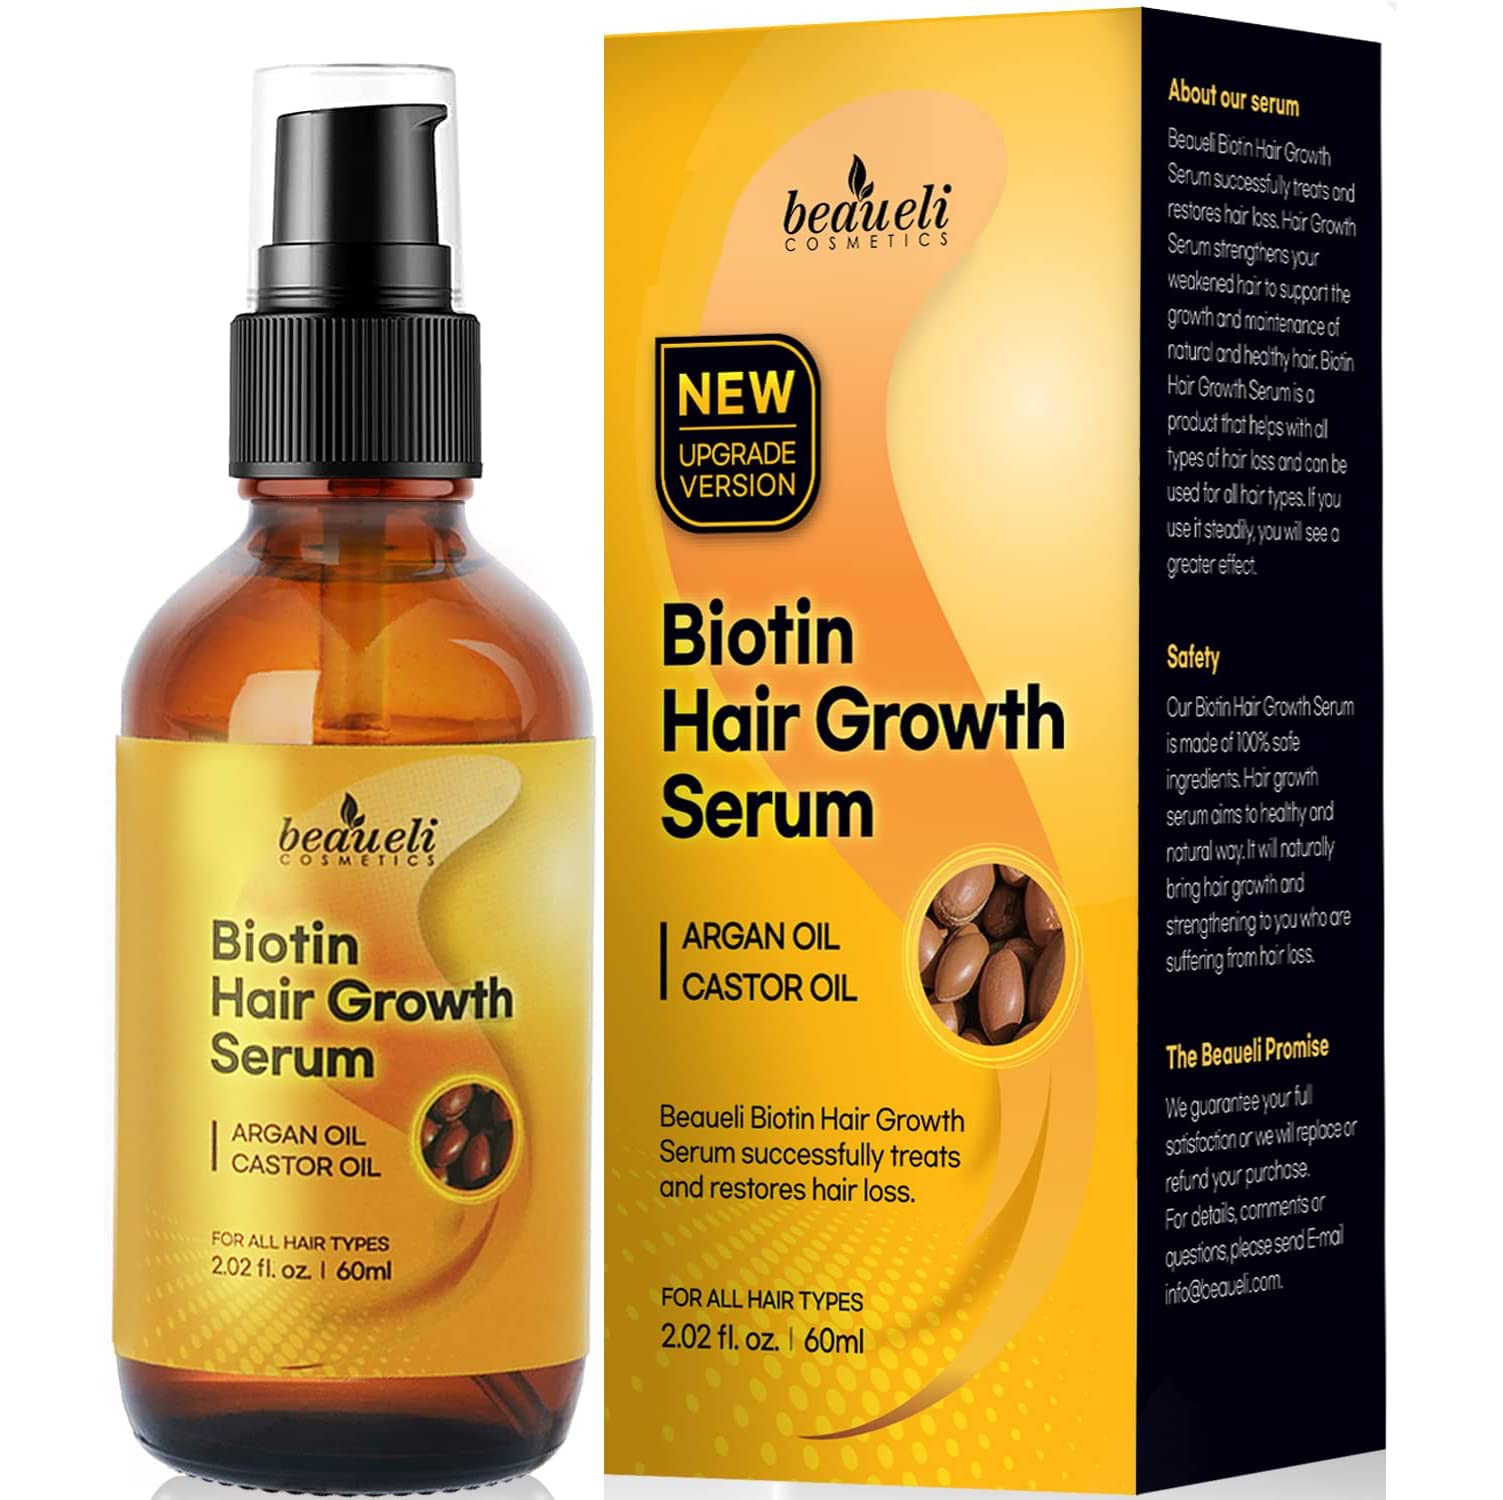 Biotin Hair Growth Serum with Castor Oil, Argan Oil - Hair Loss Prevention  Treatment with Fine Thinning